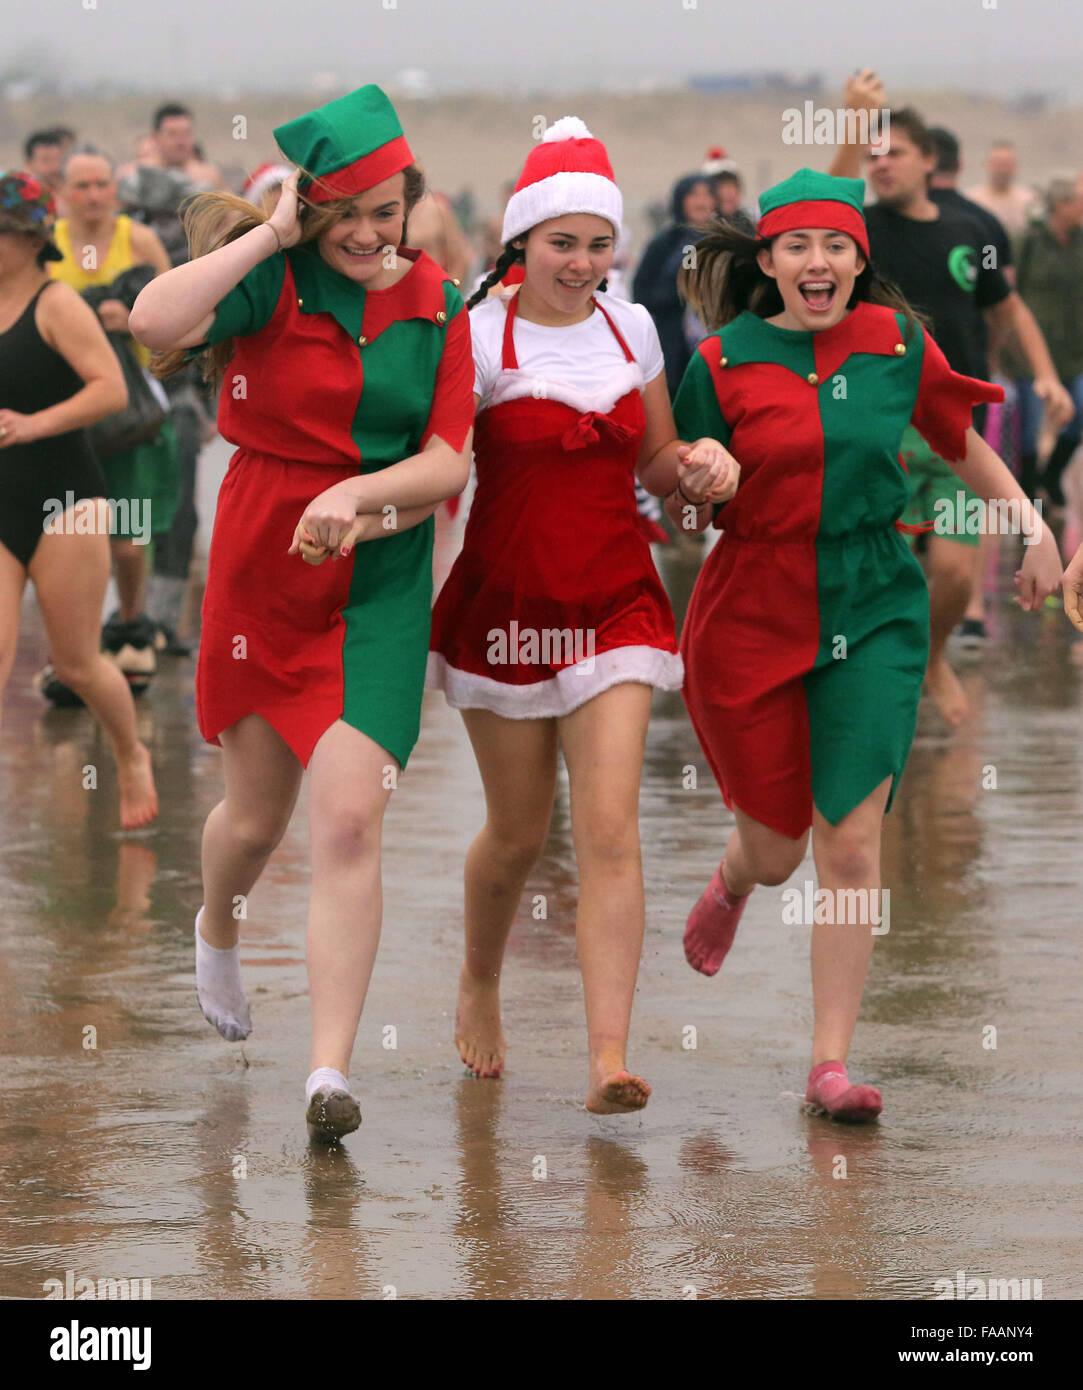 Porthcawl, UK. Friday 25 December 2015 Christmas swimmers in Santa and elf fancy dress run towards the seaRe: Hundreds of people in fancy dress, have taken part in this year's Christmas Swim in Porthcawl, south Wales. Credit:  D Legakis/Alamy Live News Stock Photo